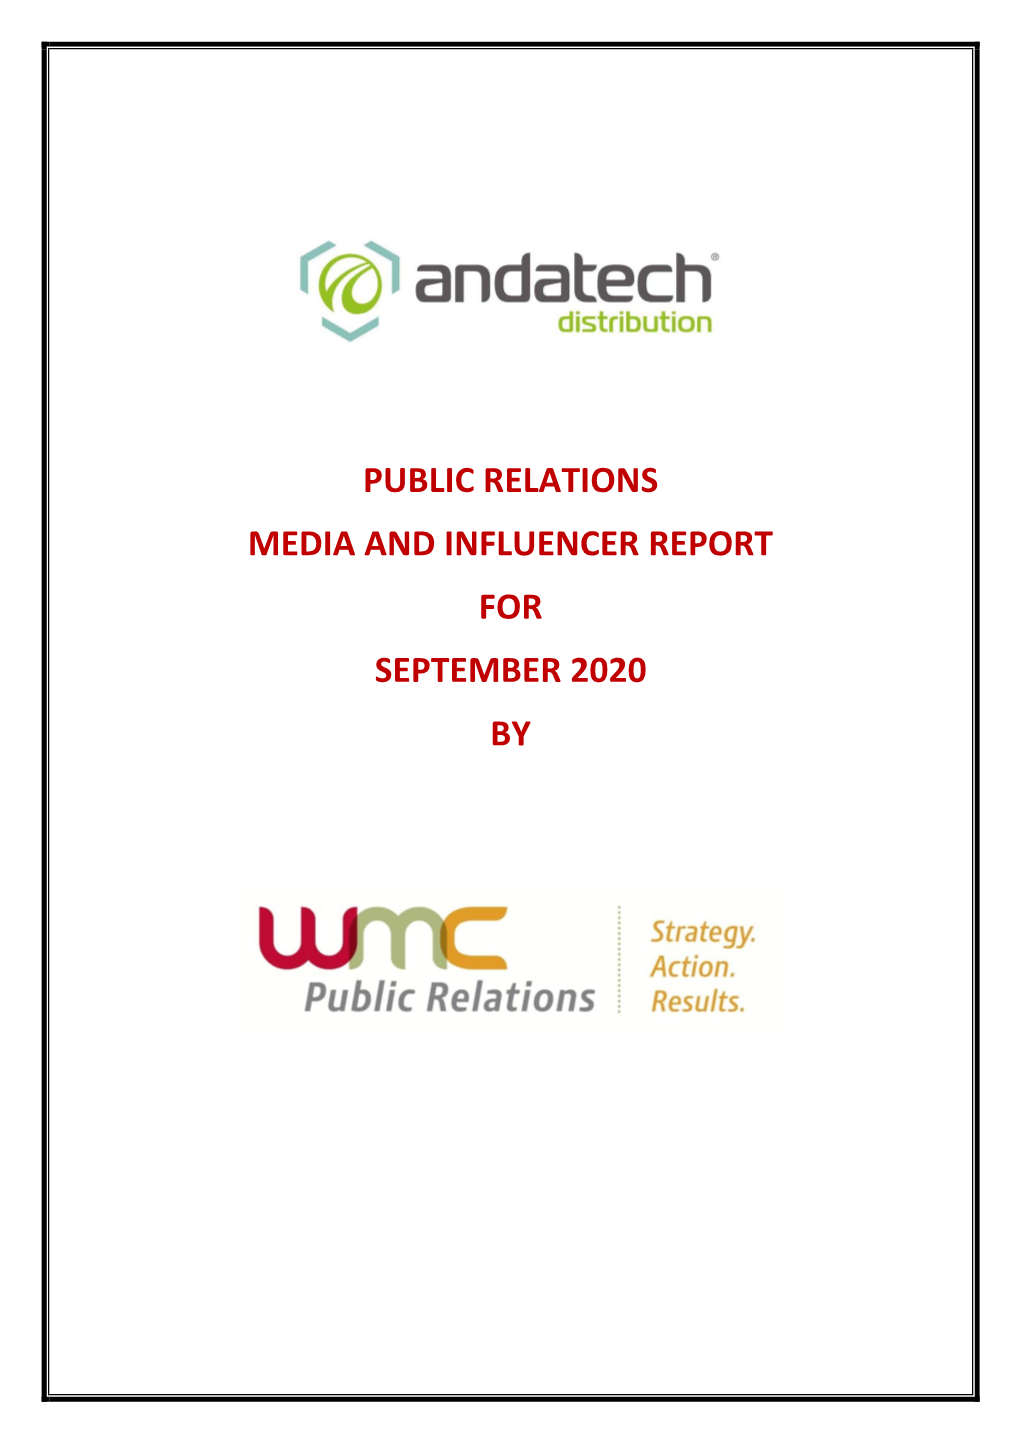 Public Relations Media and Influencer Report for September 2020 By